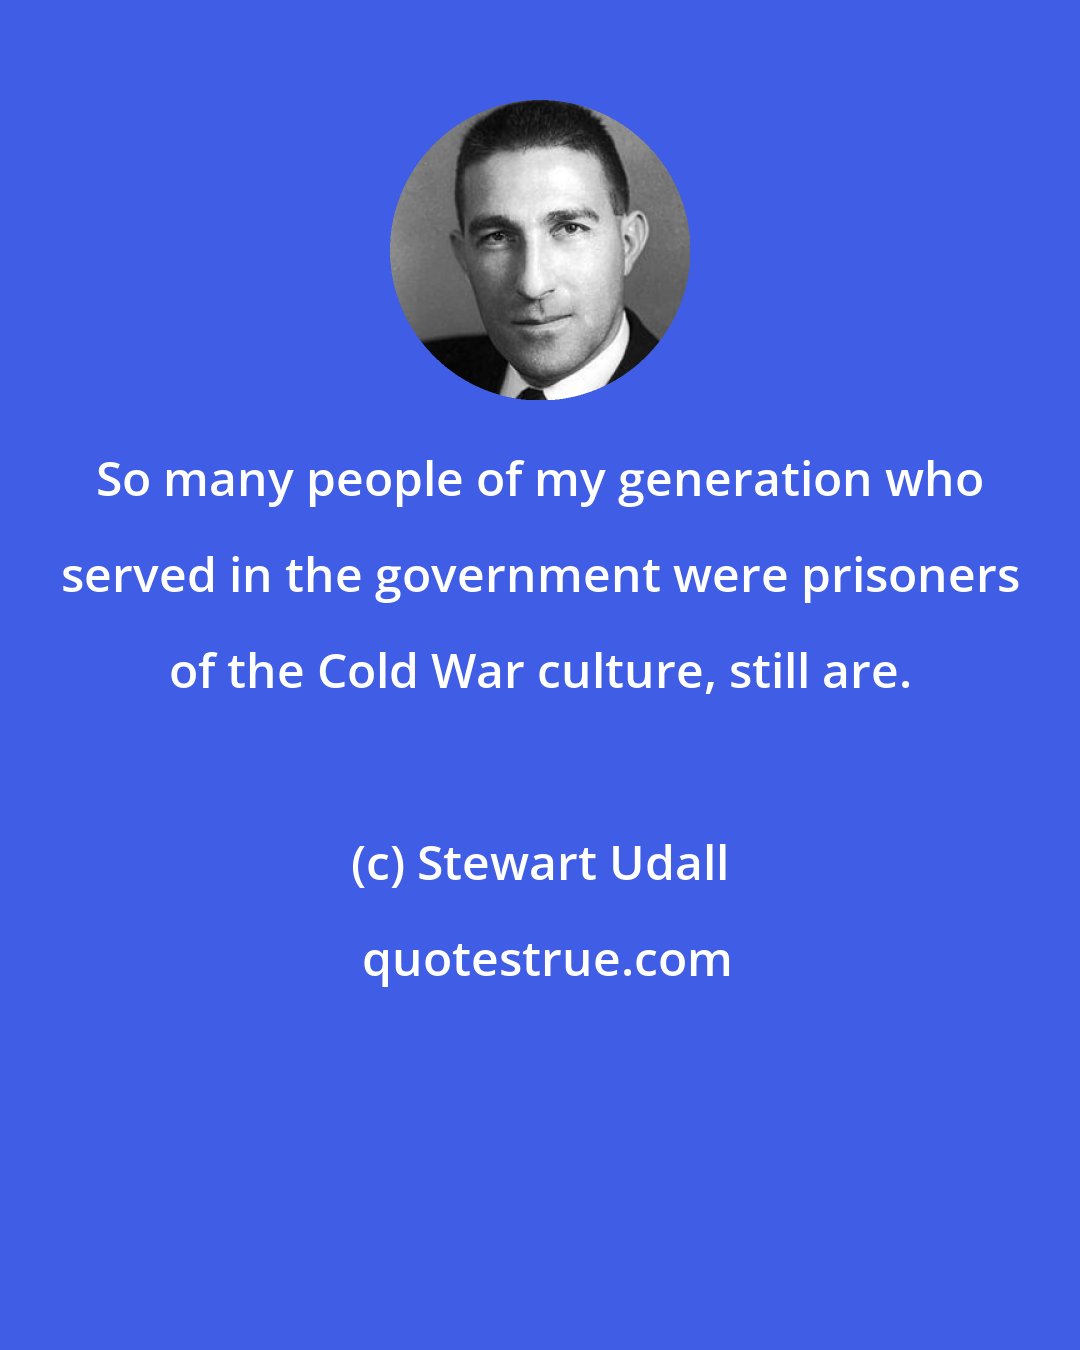 Stewart Udall: So many people of my generation who served in the government were prisoners of the Cold War culture, still are.